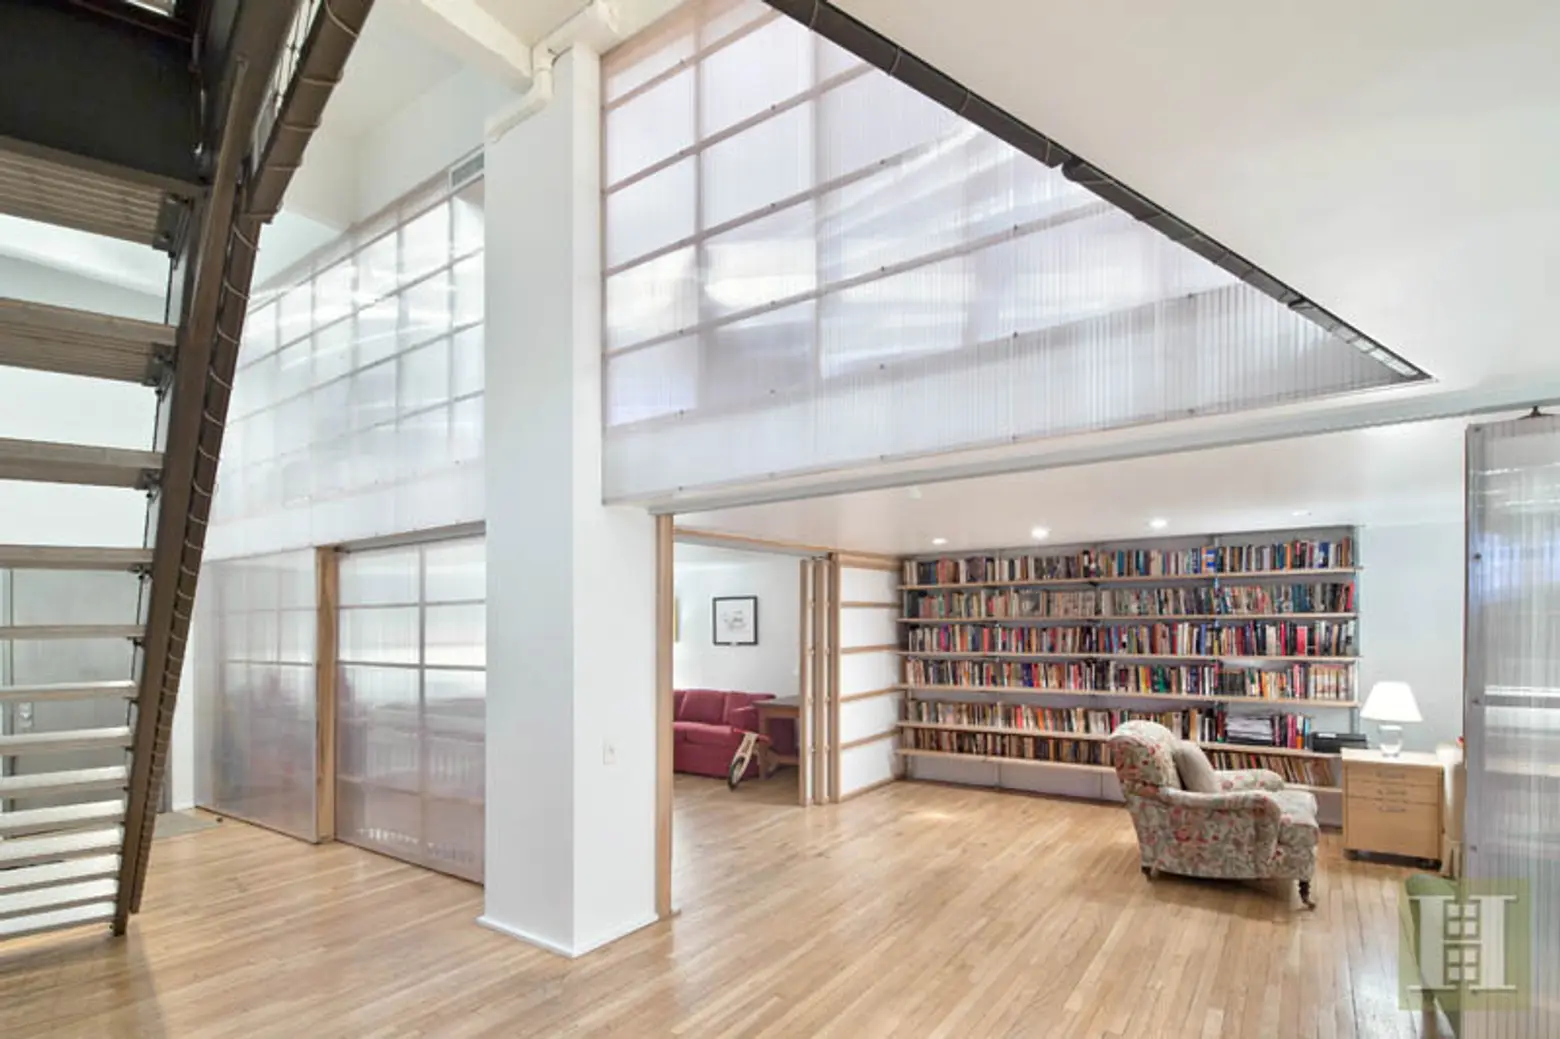 $3.45 Million West Village Loft Accented with Glazed Glass Sells for Asking